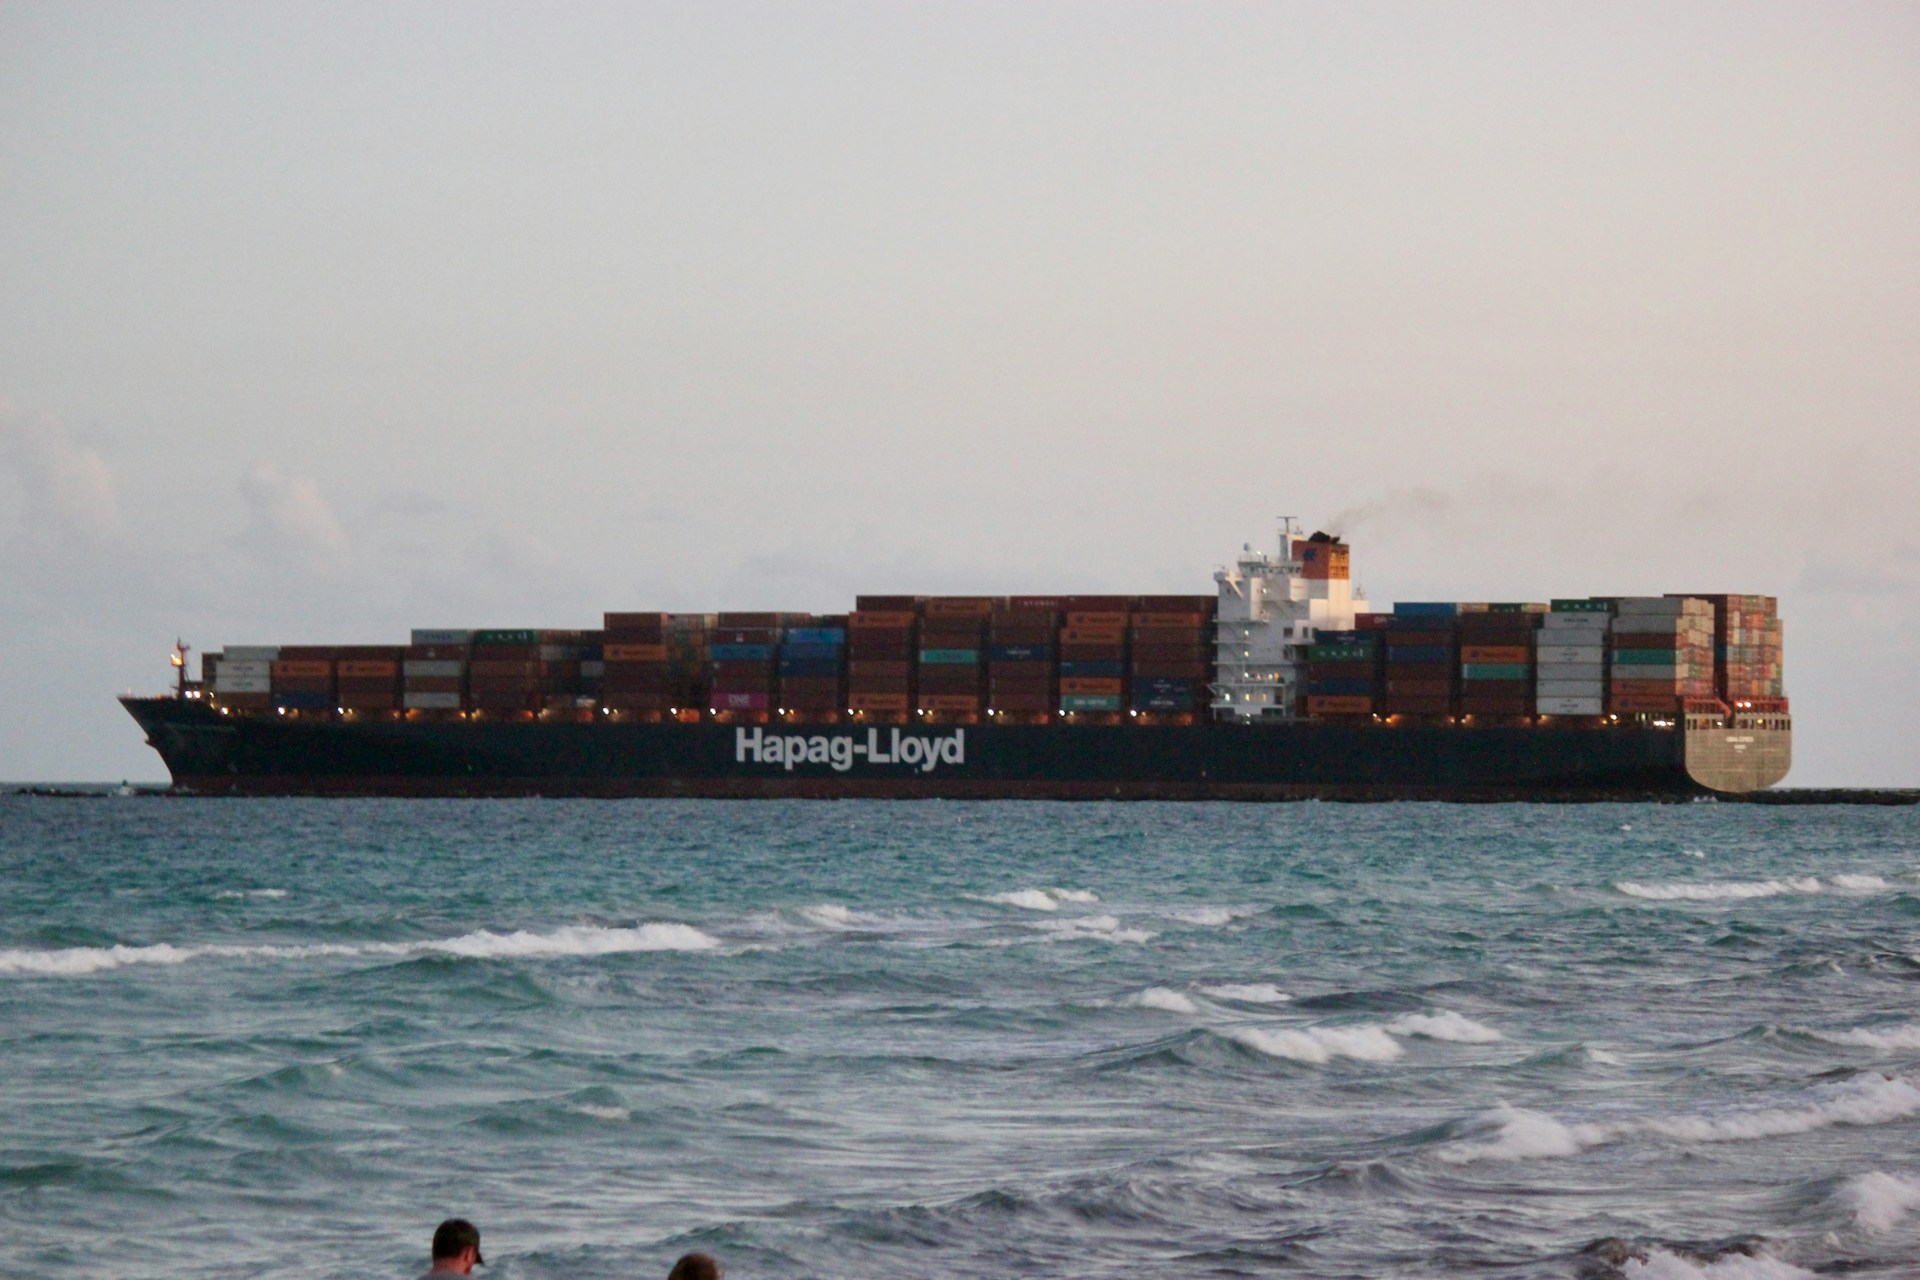 A Hapag-Lloyd container ship